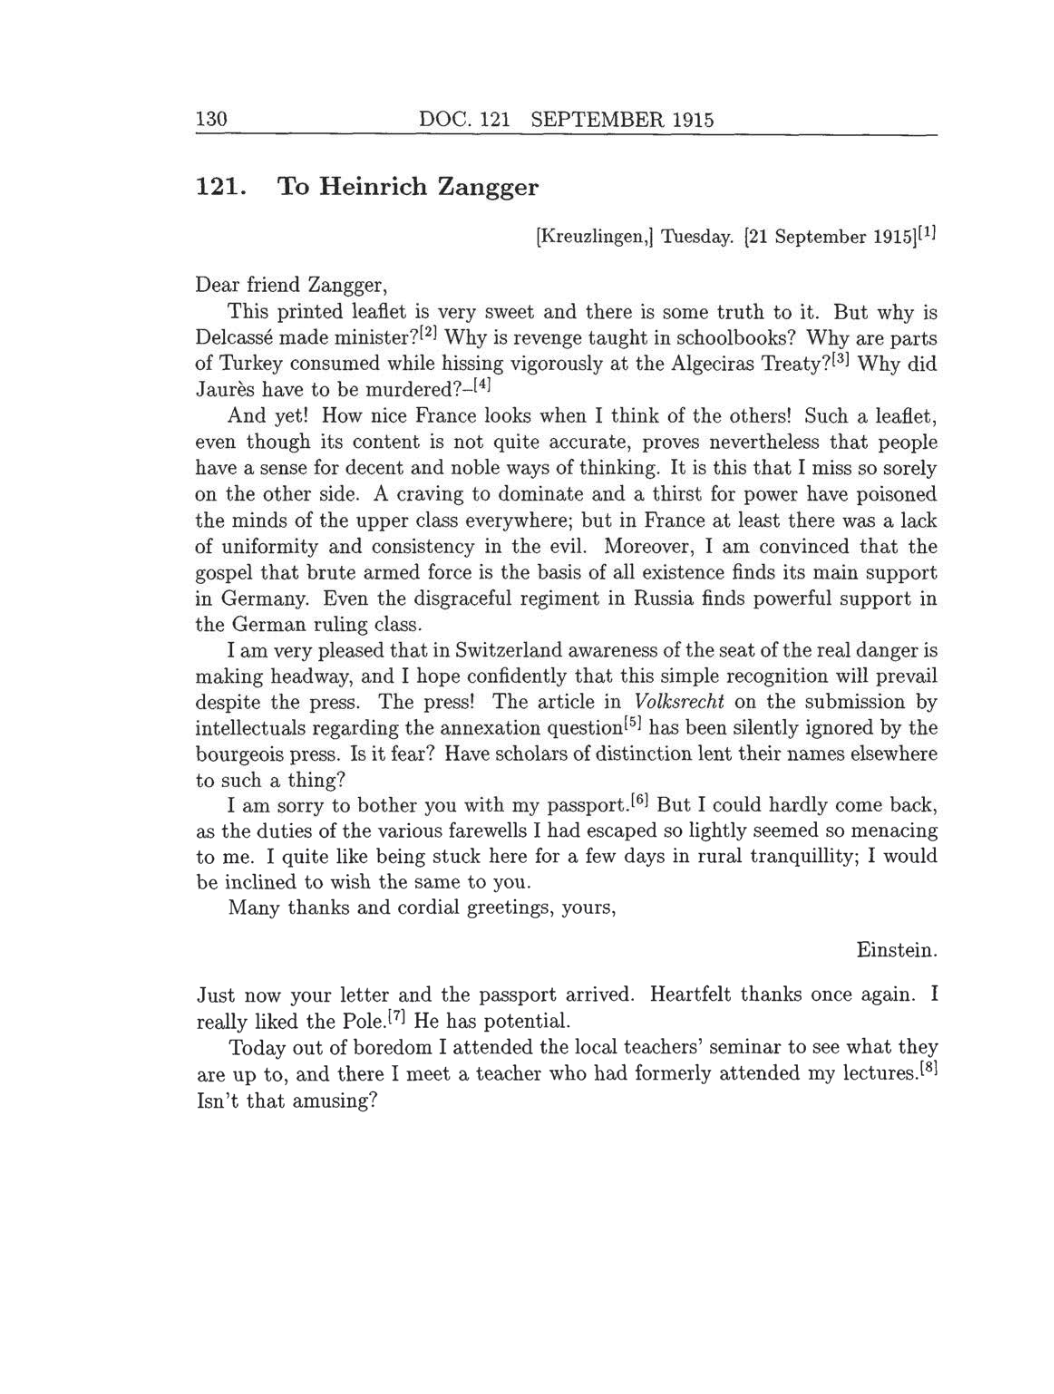 Volume 8: The Berlin Years: Correspondence, 1914-1918 (English translation supplement) page 130